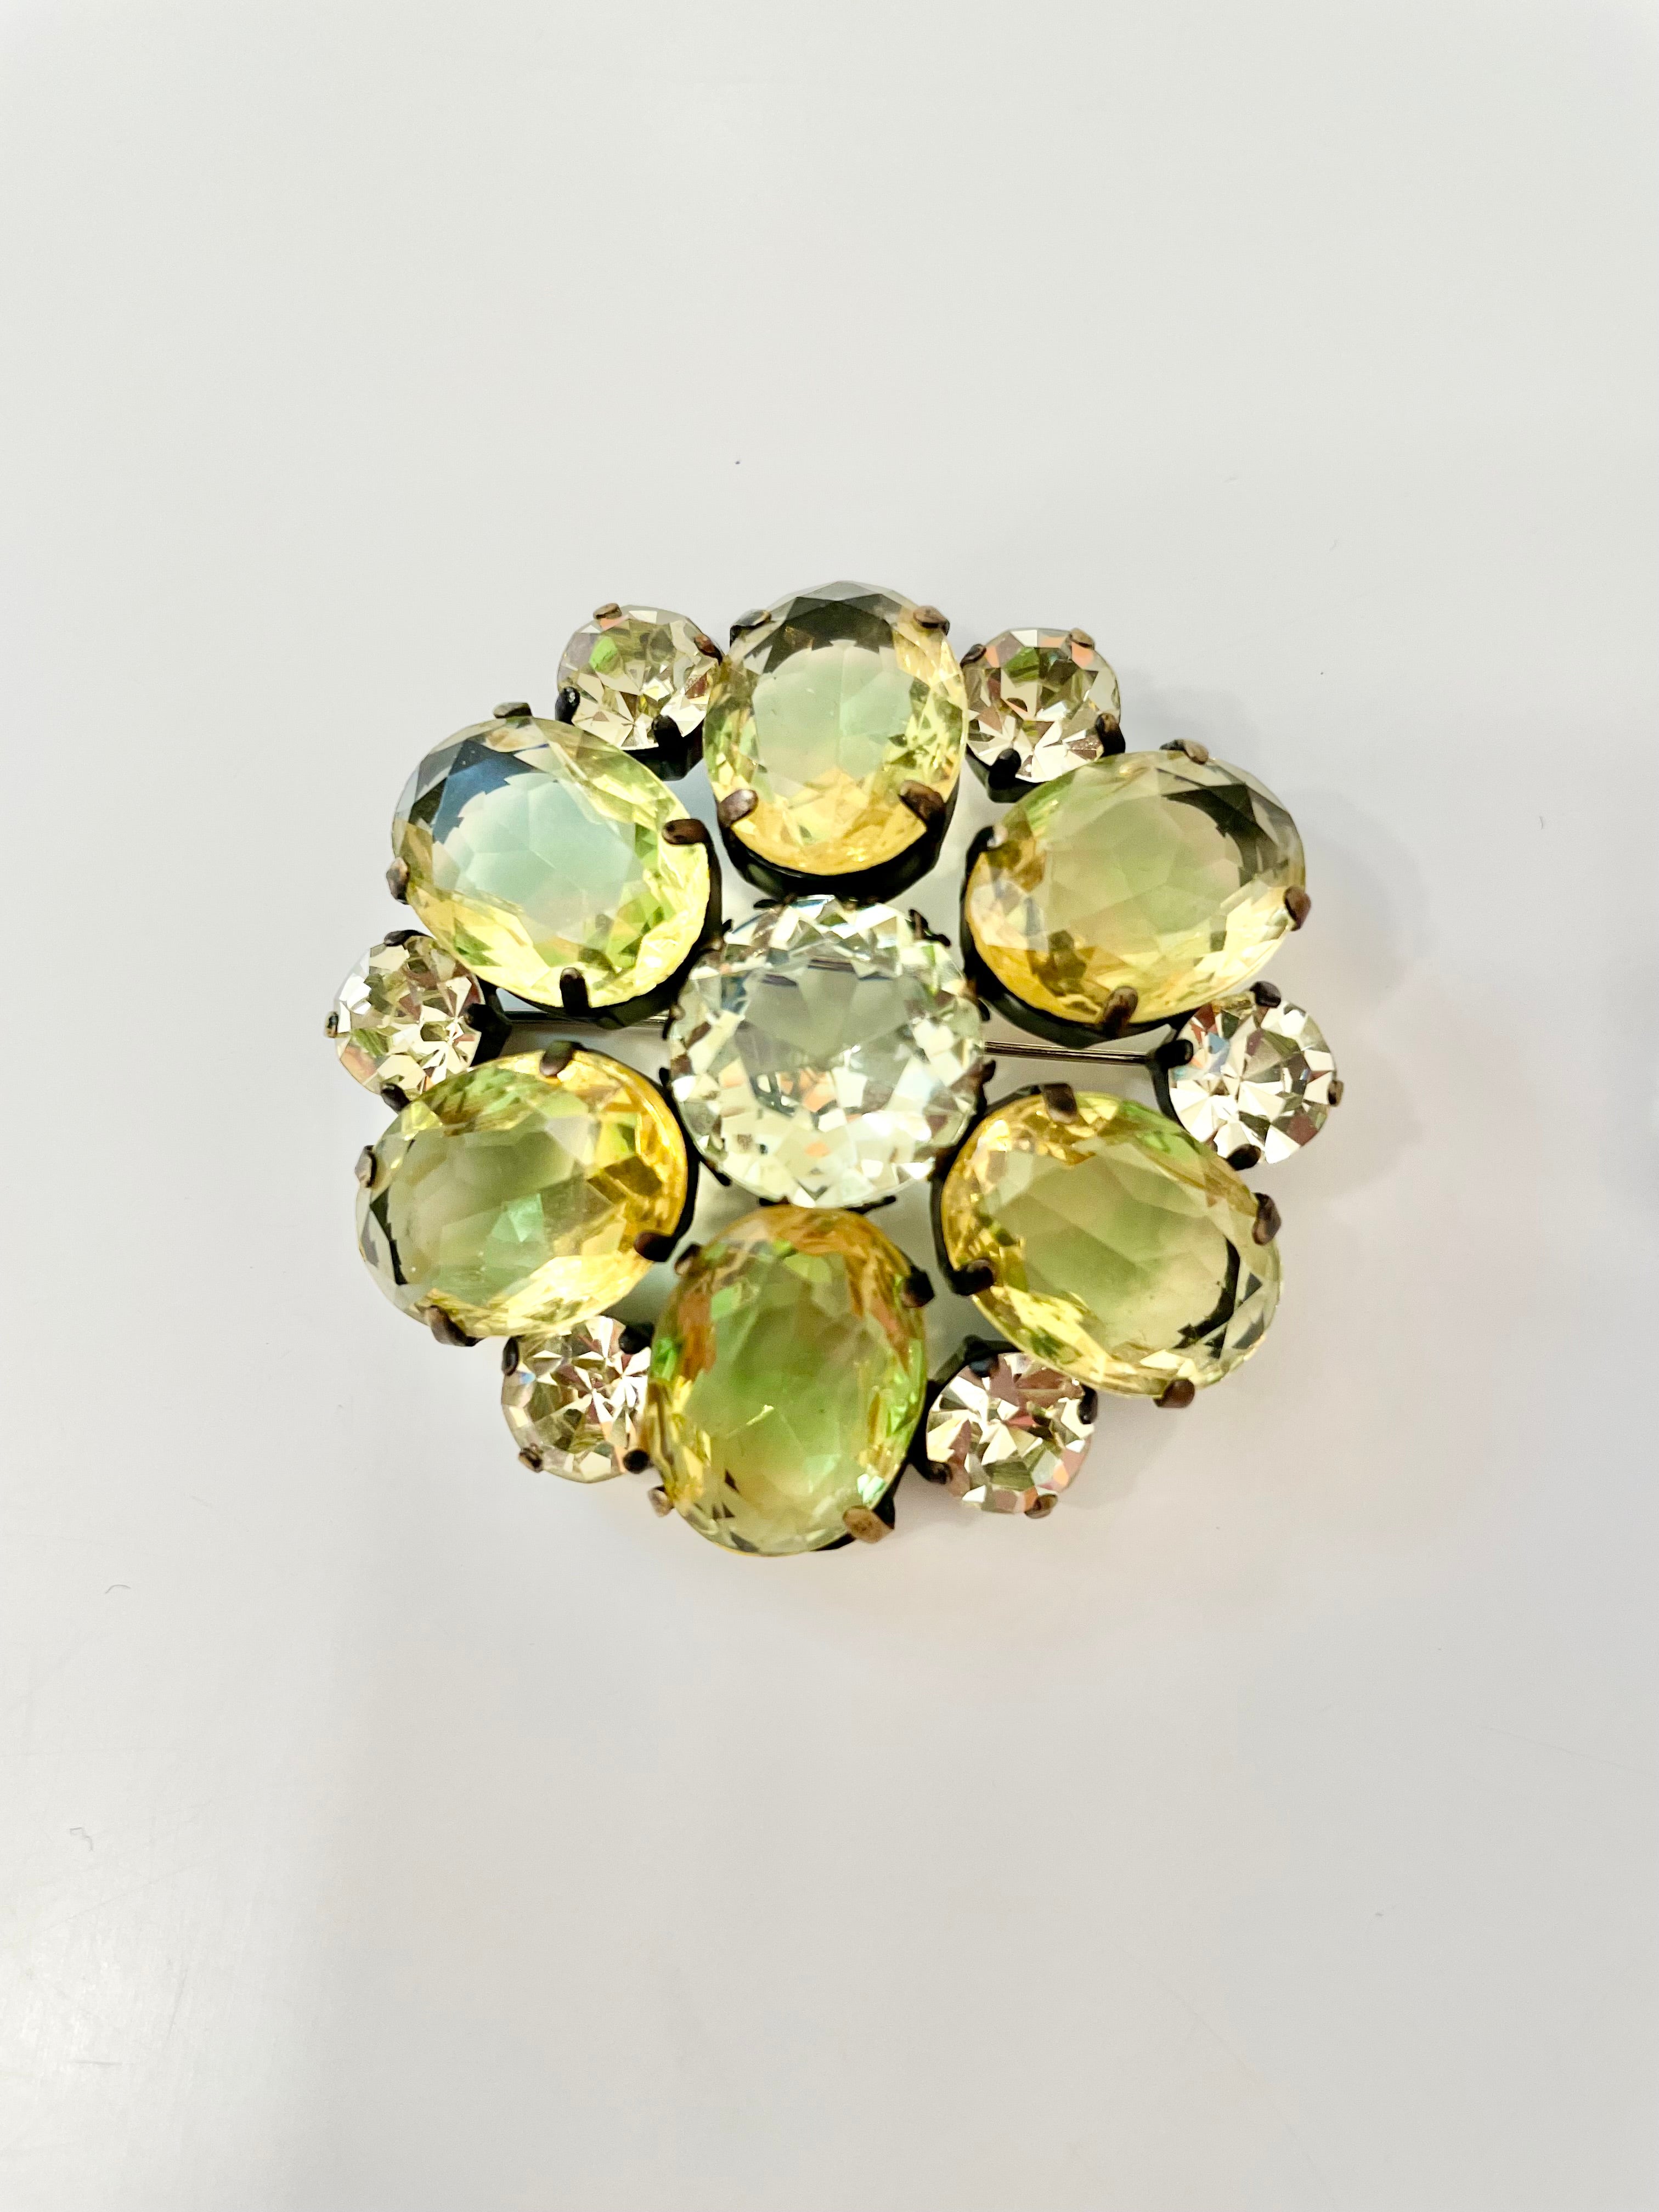 Vintage 1960's stunning lemon glass brooch.... color story is impeccable!